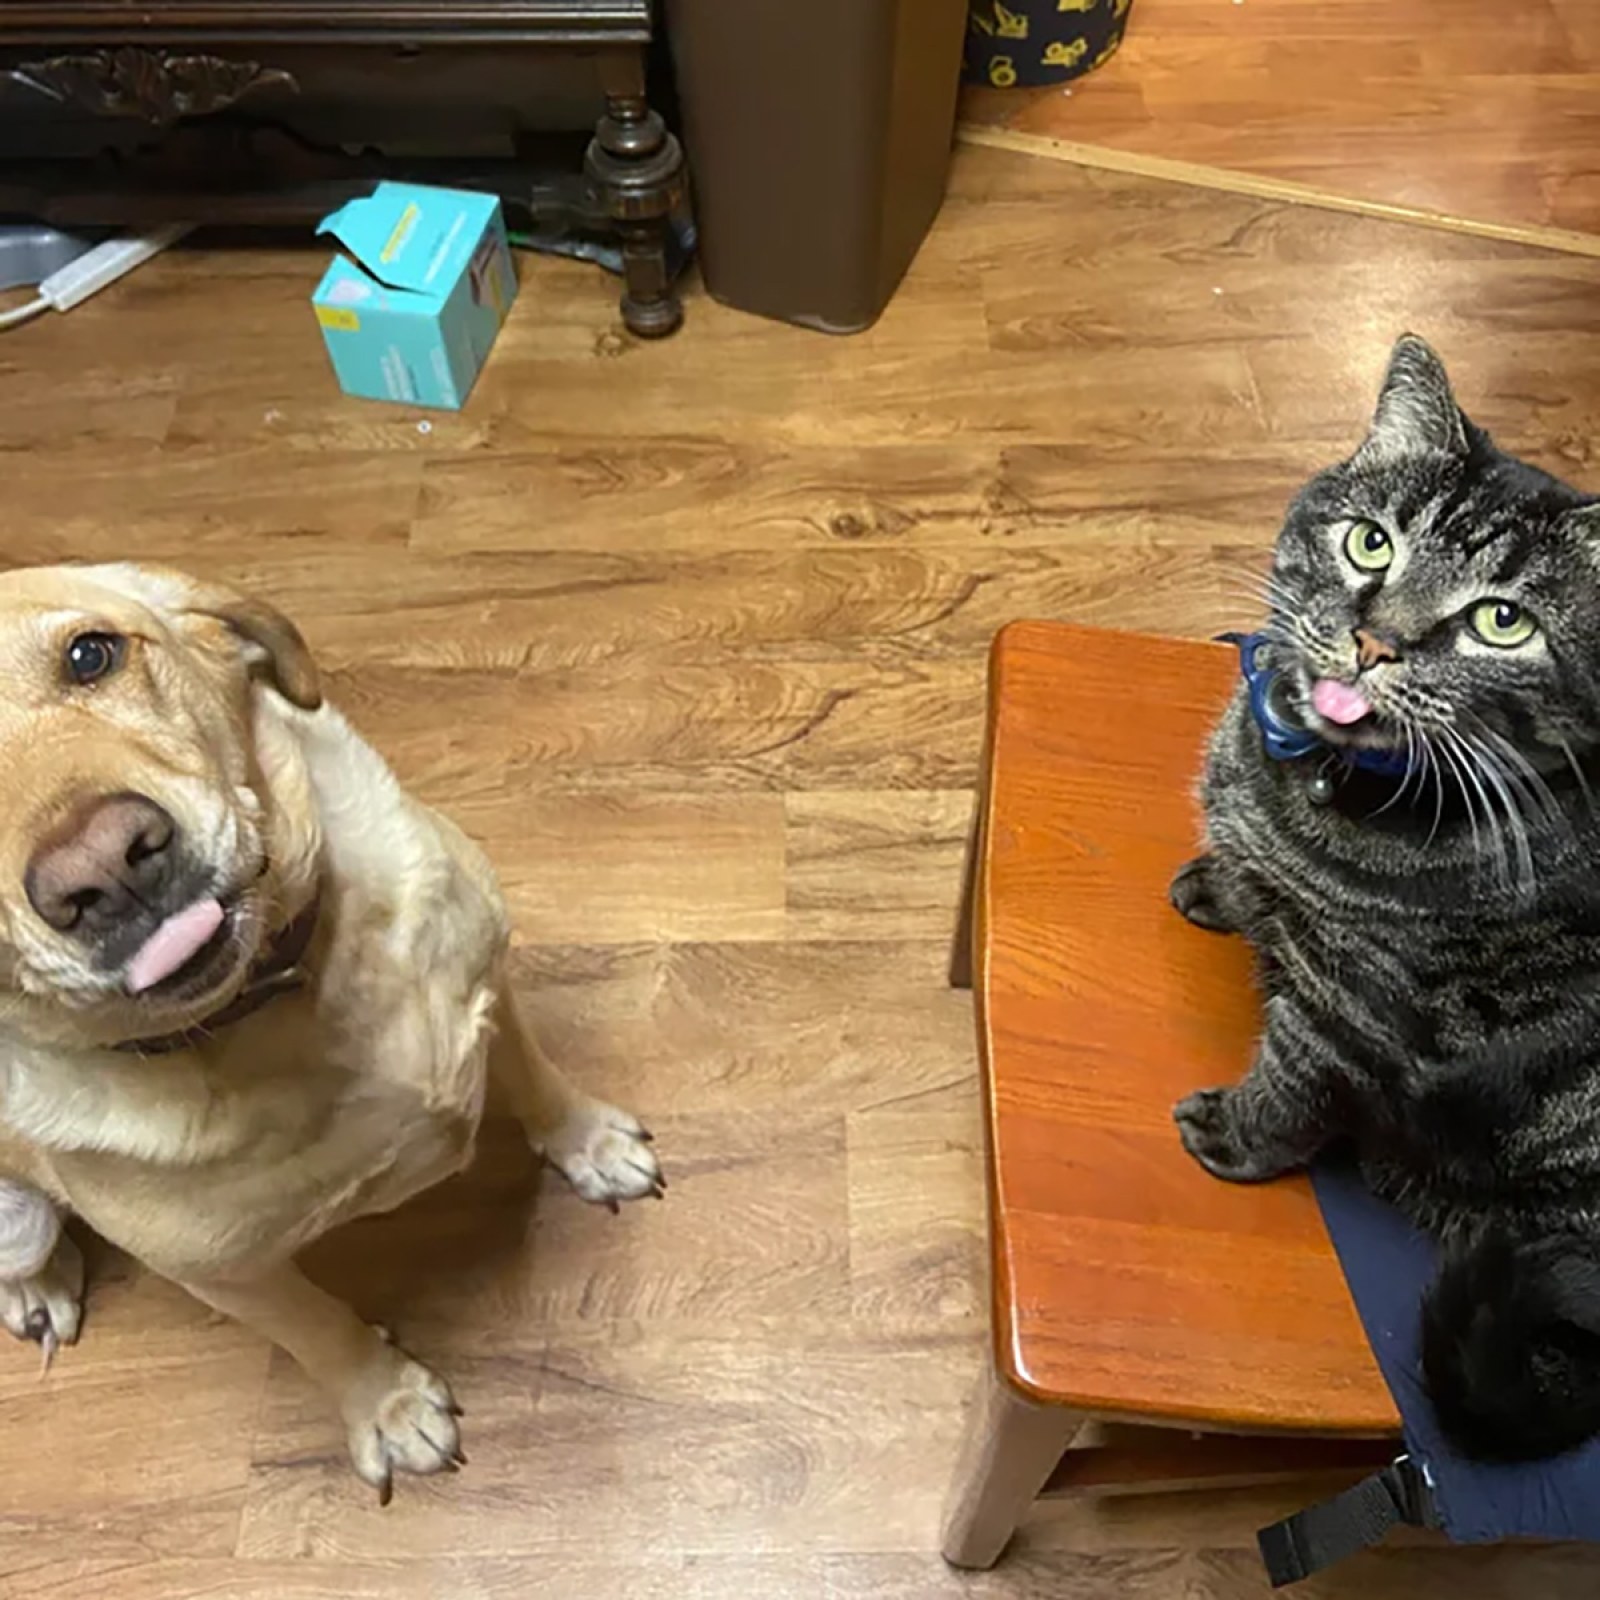 Incredible Moment Cat and Dog Strike Same Pose in Photo: 'Adorable Idiots'